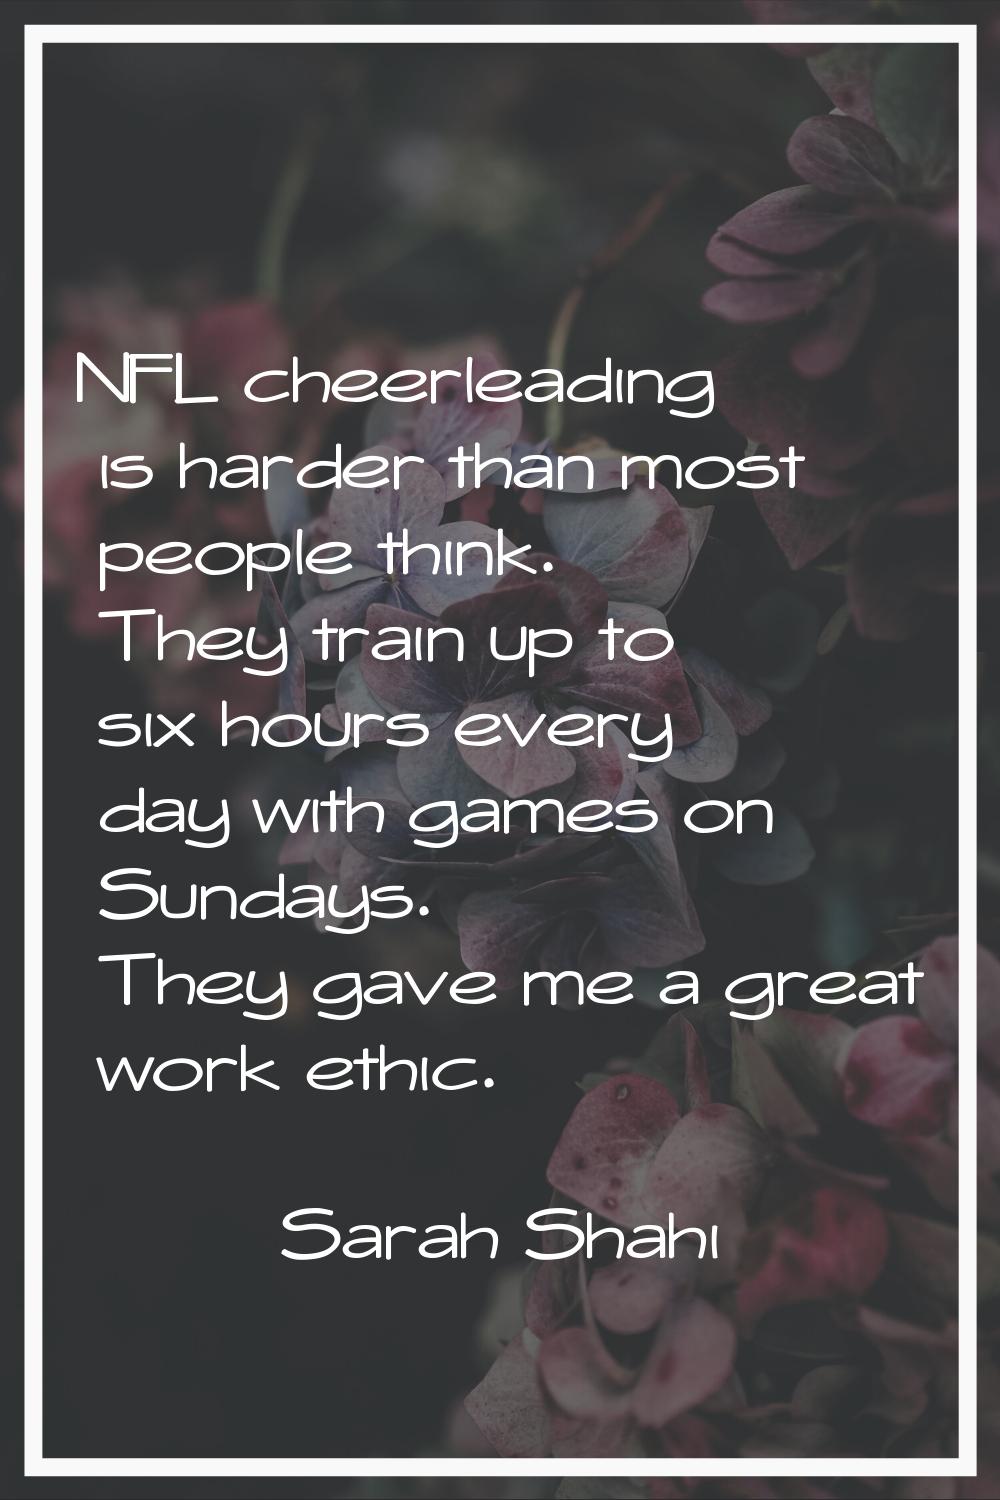 NFL cheerleading is harder than most people think. They train up to six hours every day with games 